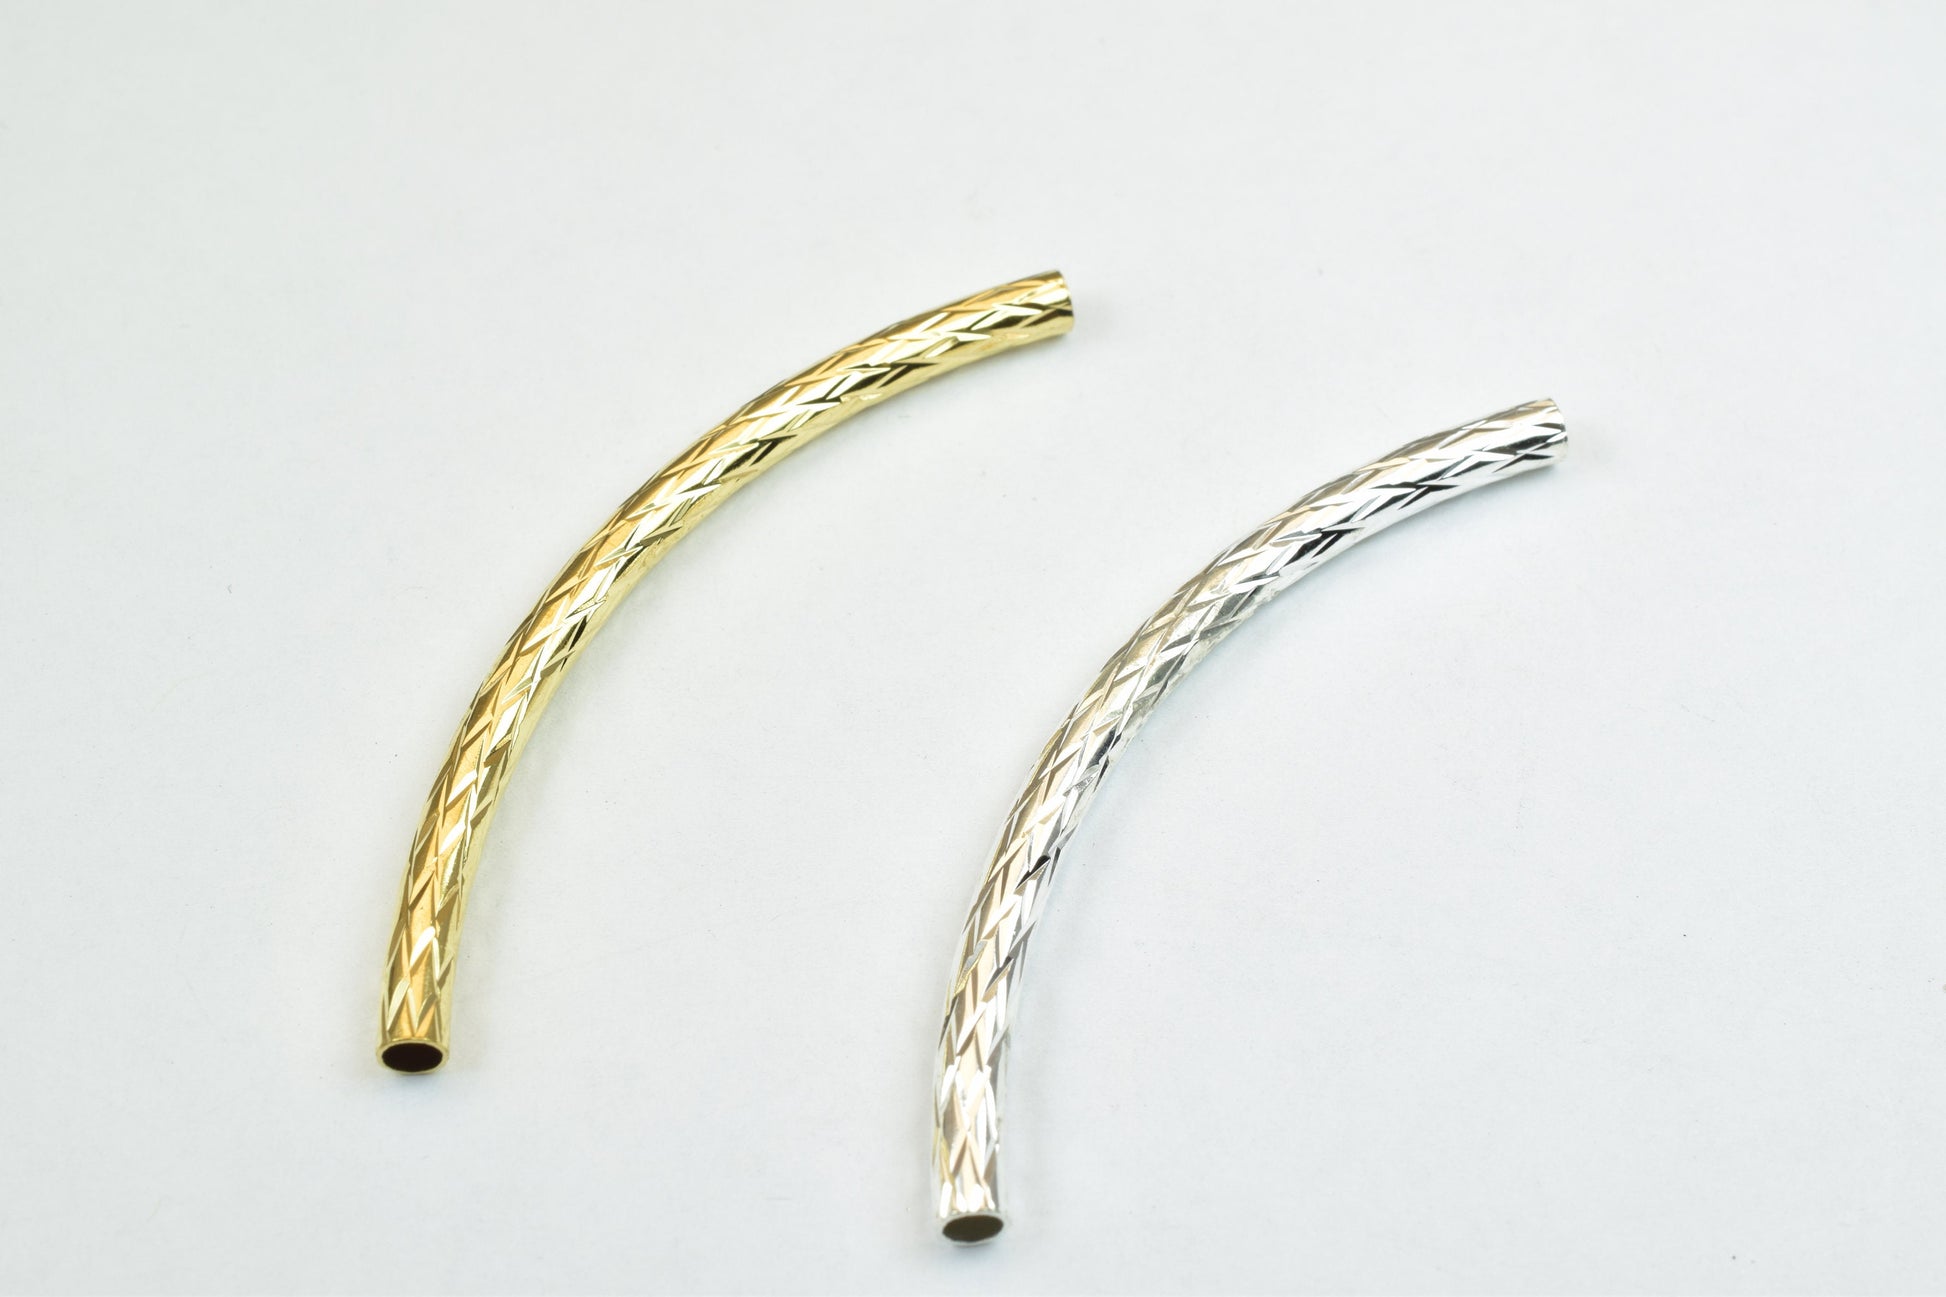 12 PCs Curve Tube Jewelry Finding Beads Size 3x50mm Diamond Cut Gold/Silver For Jewelry Making